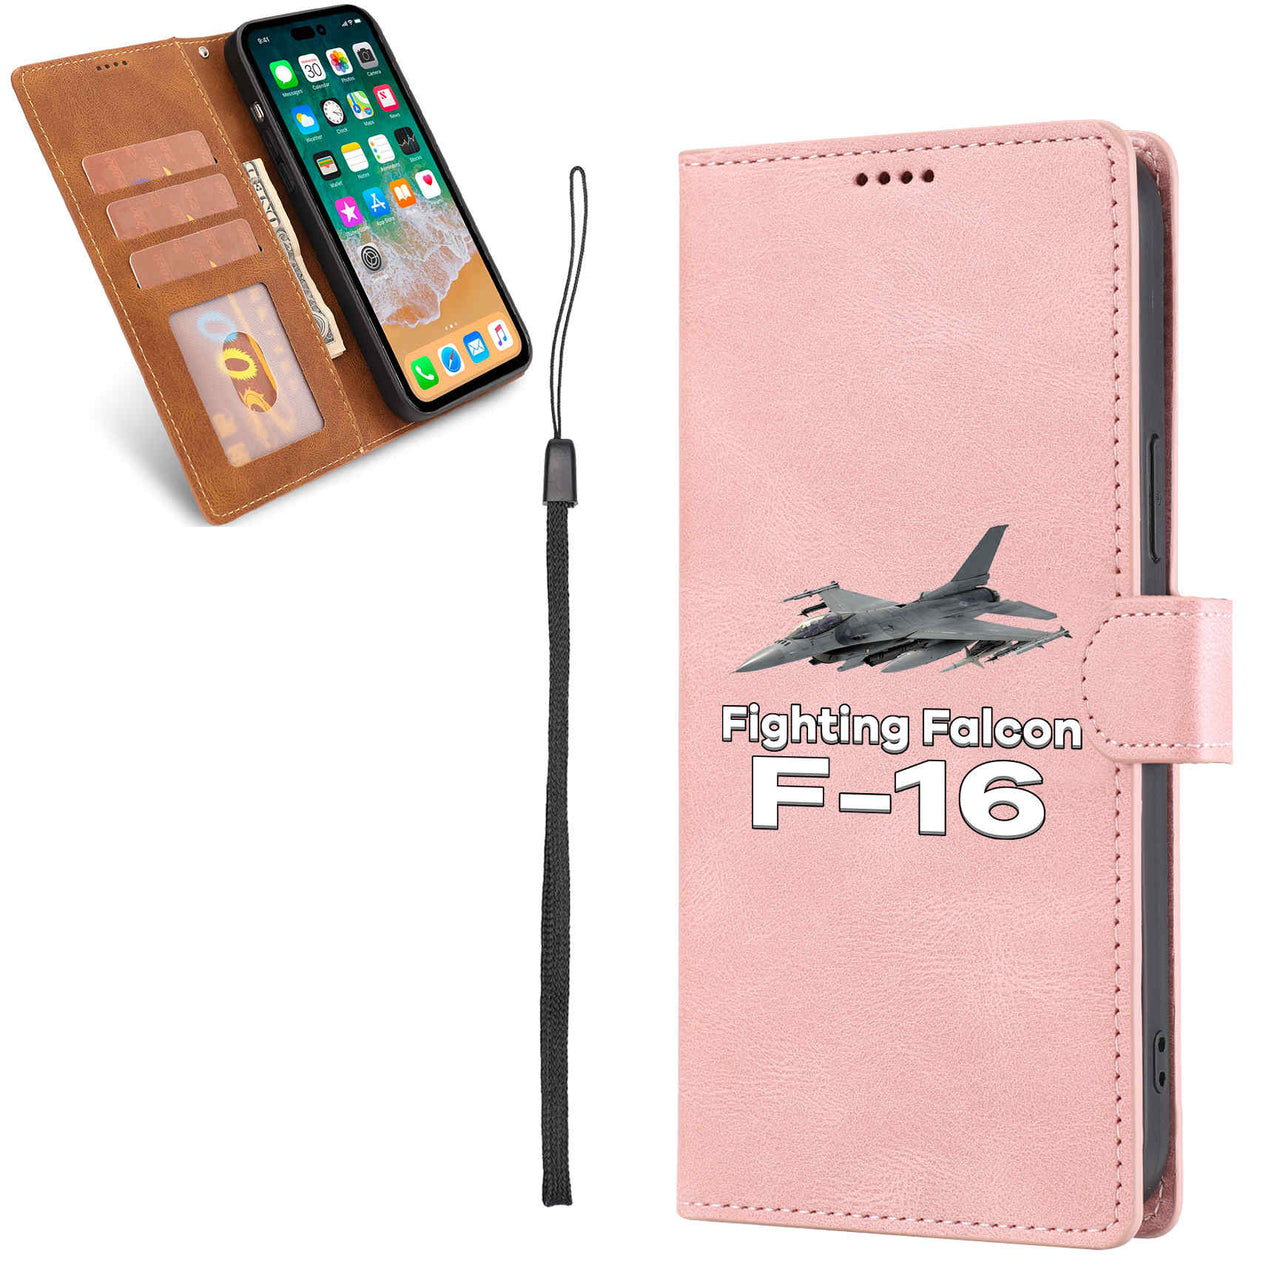 The Fighting Falcon F16 Leather Samsung A Cases